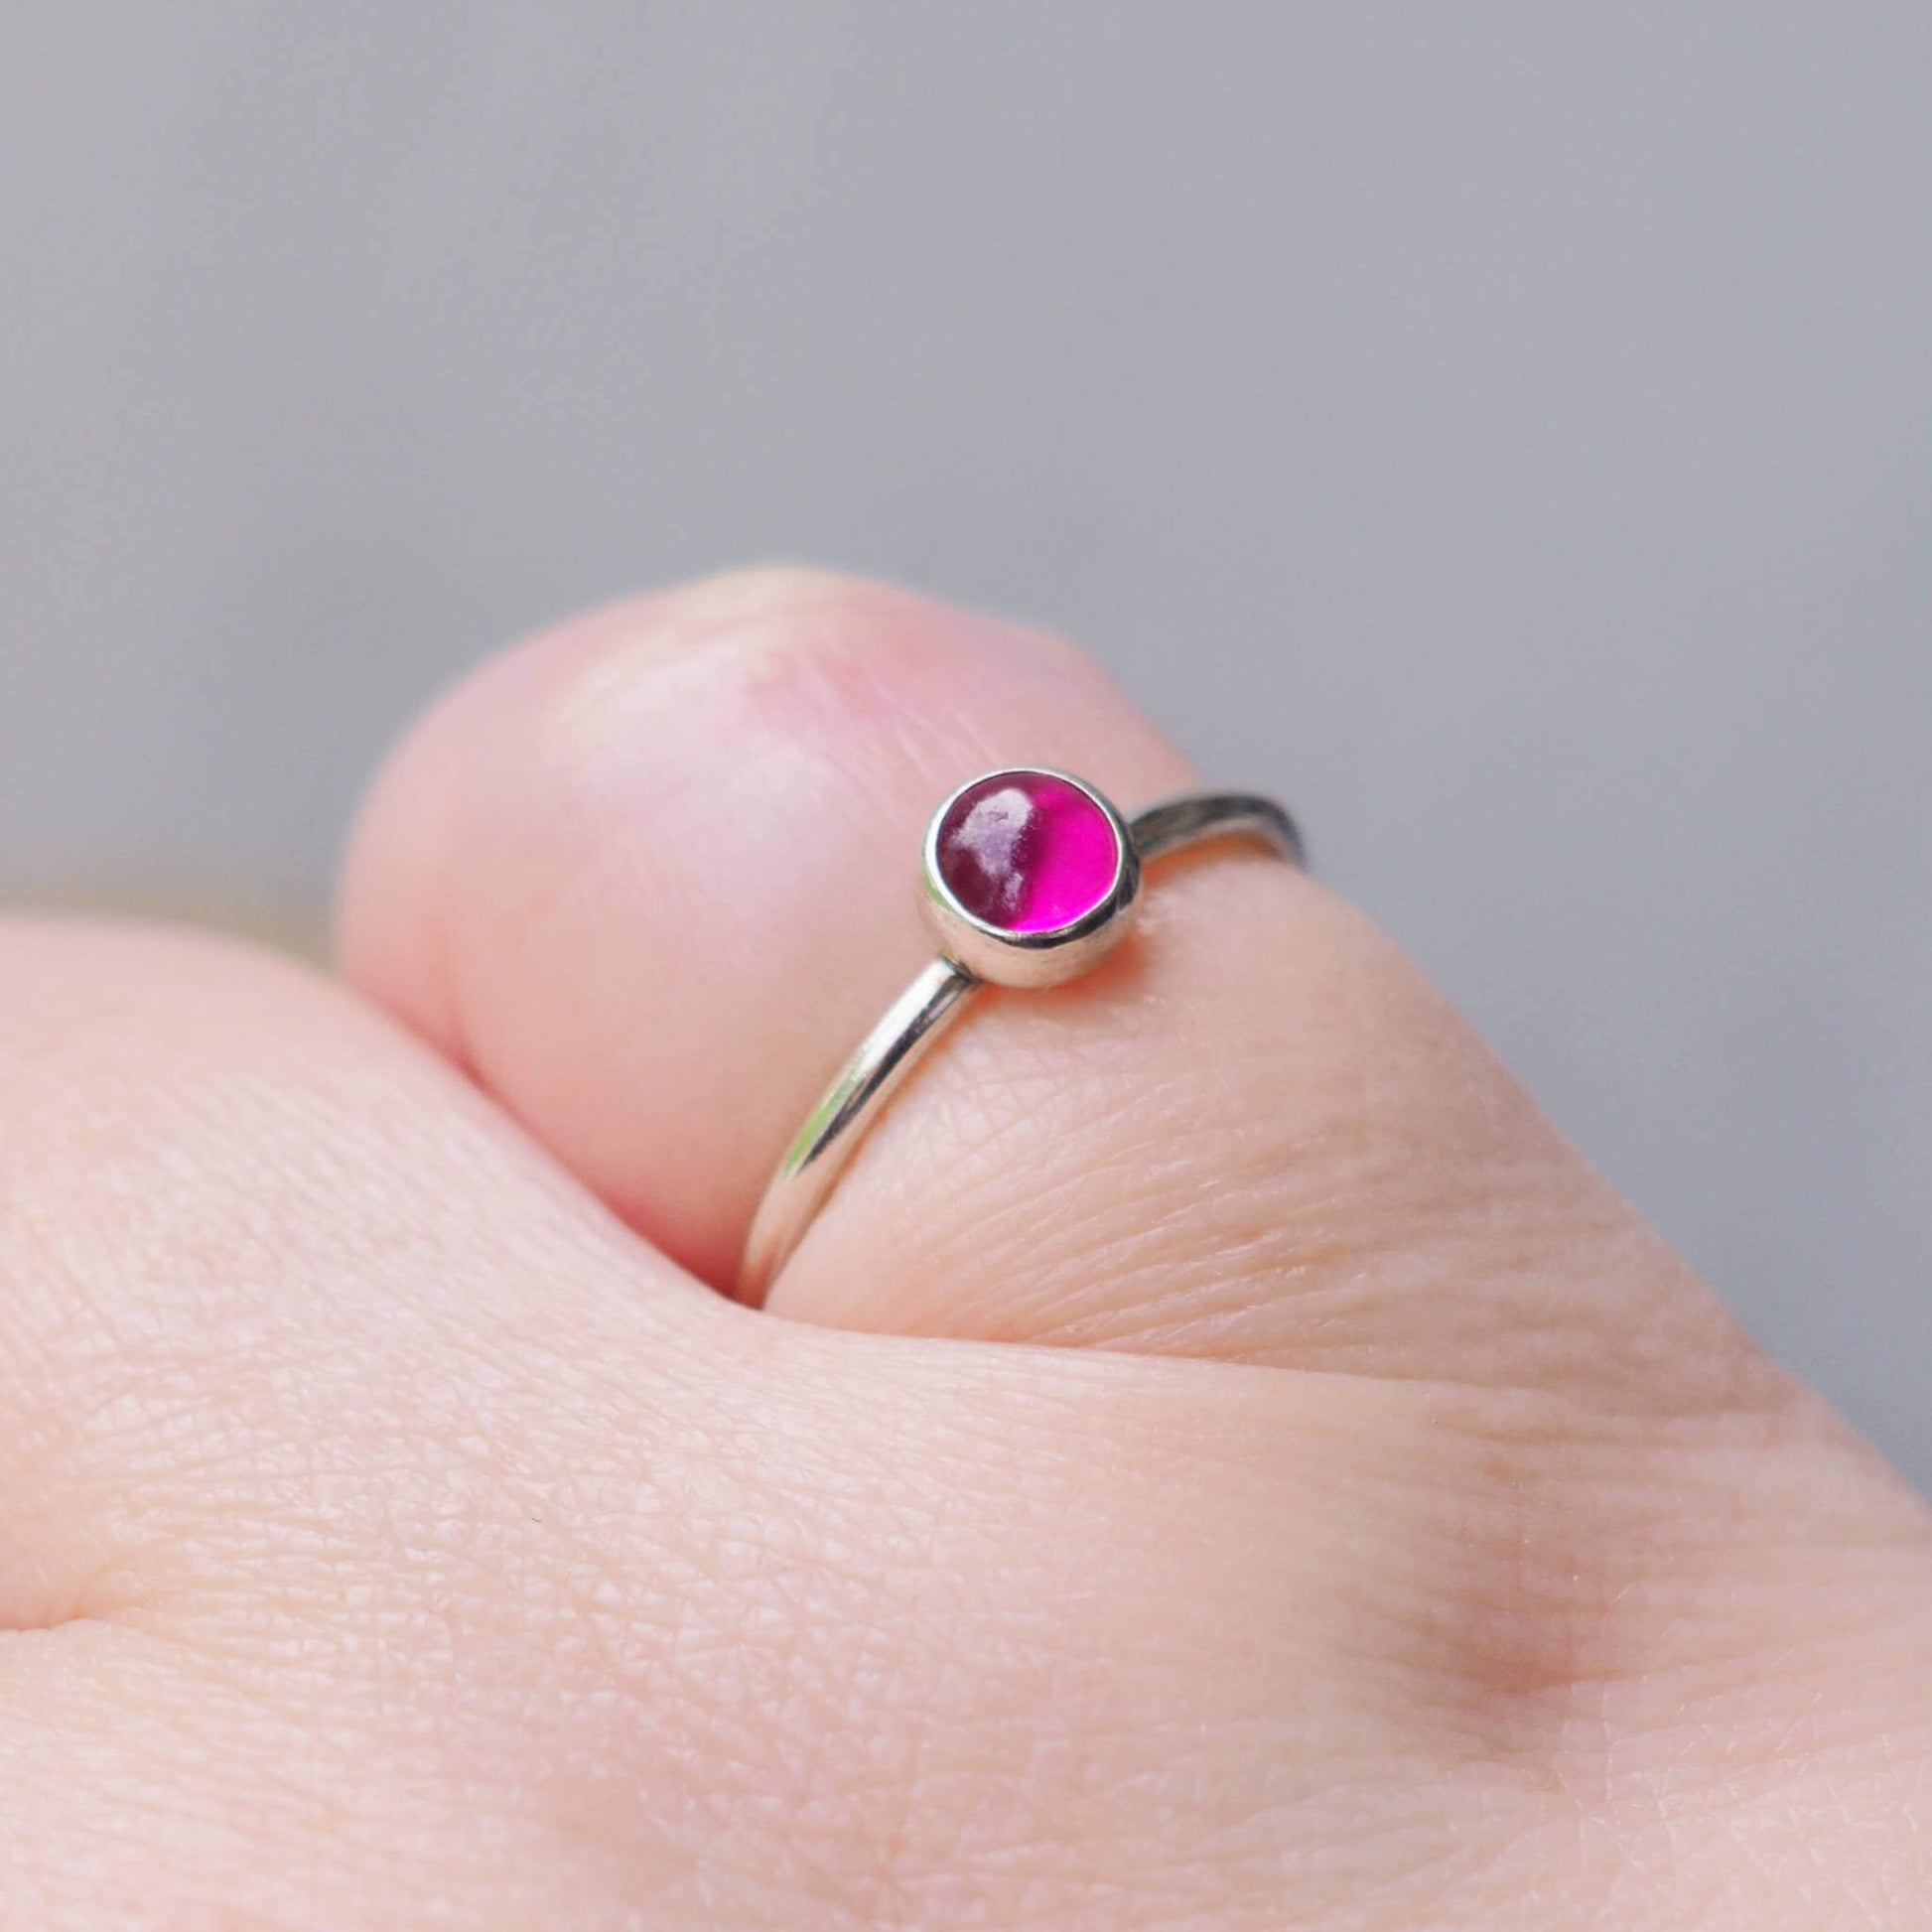 Single Solitaire simple style Sterling SIlver and A Lab Ruby pink Cabochon ring. The lab ruby gemstone is round and measure 5mm and it's set onto a band of fully round wire. It can be made to measure in any size. Handmade in Scotland by Maram Jewellery